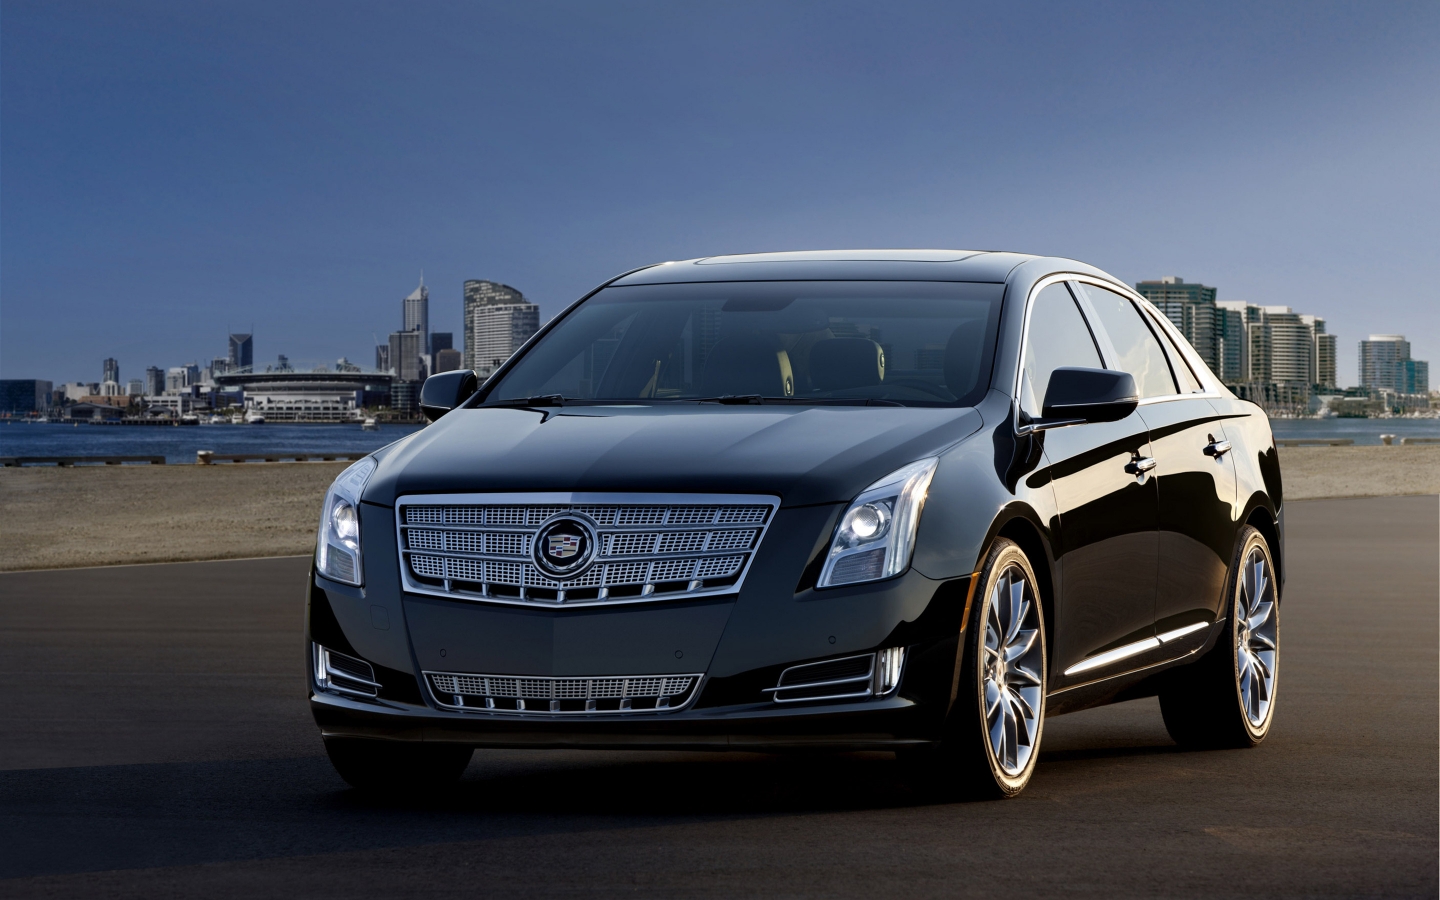 Cadillac XTS 2013 Edition for 1440 x 900 widescreen resolution